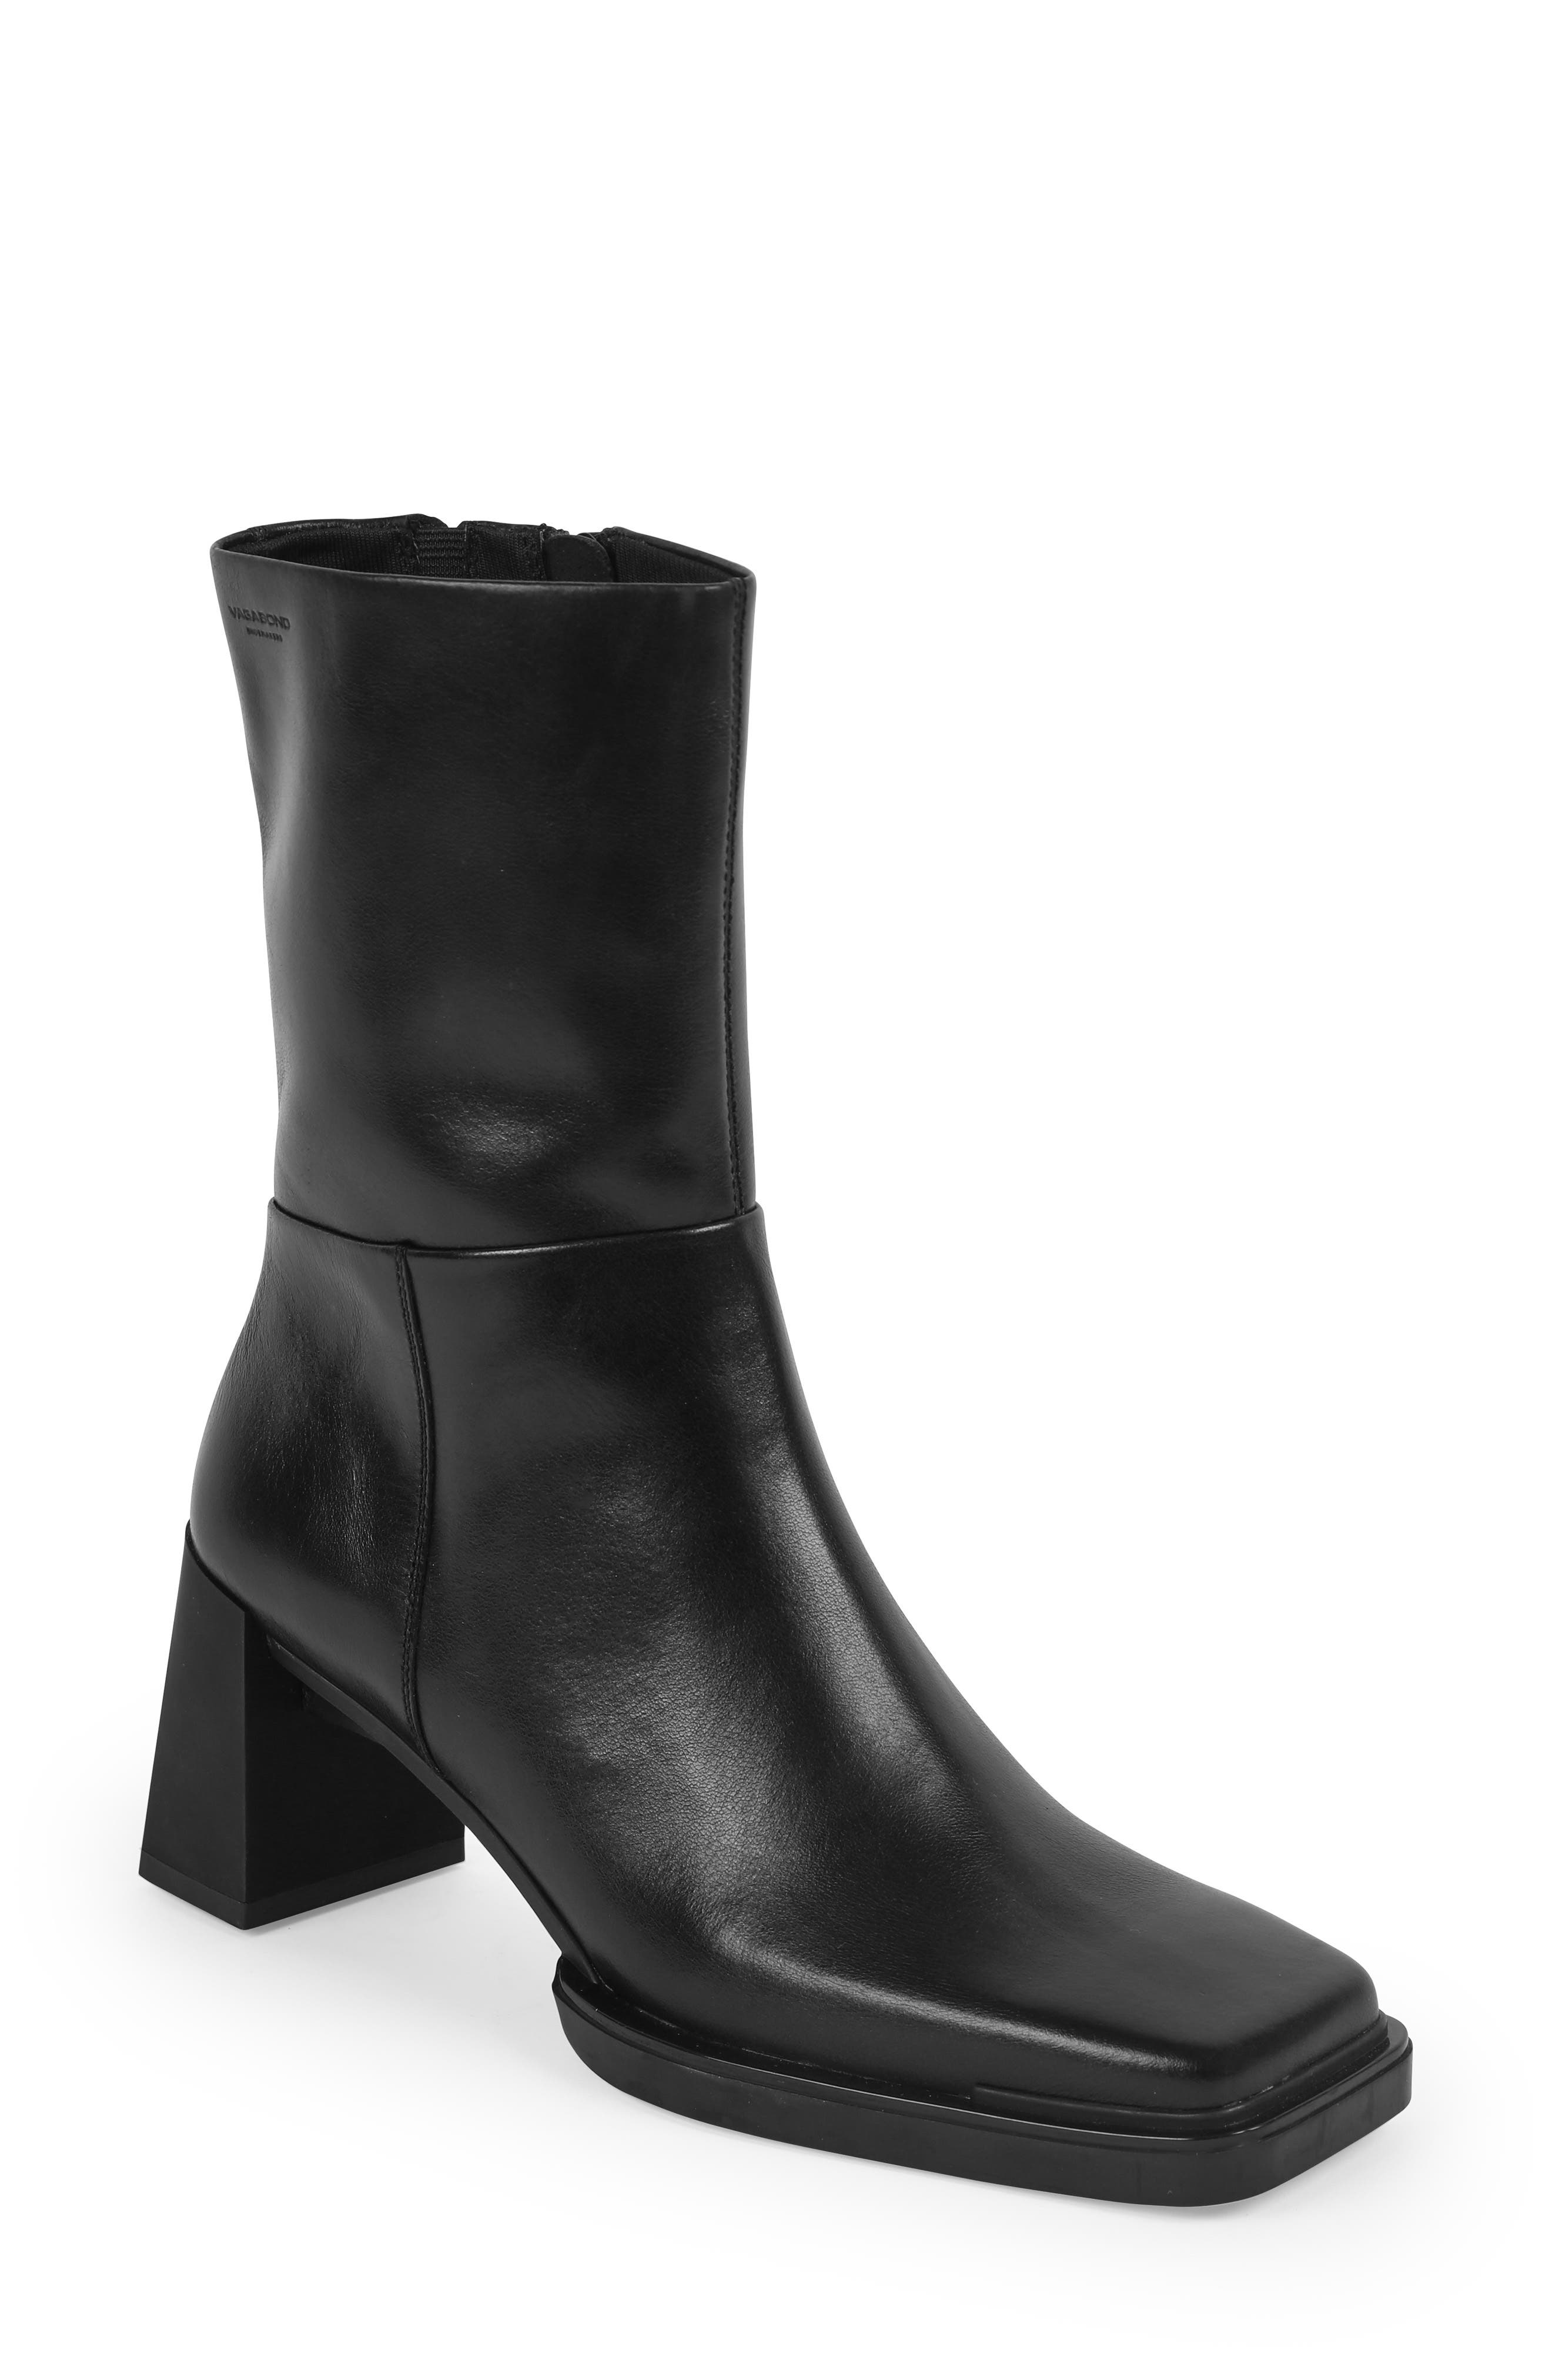 Buy > mya stretch bootie vagabond shoemakers > in stock